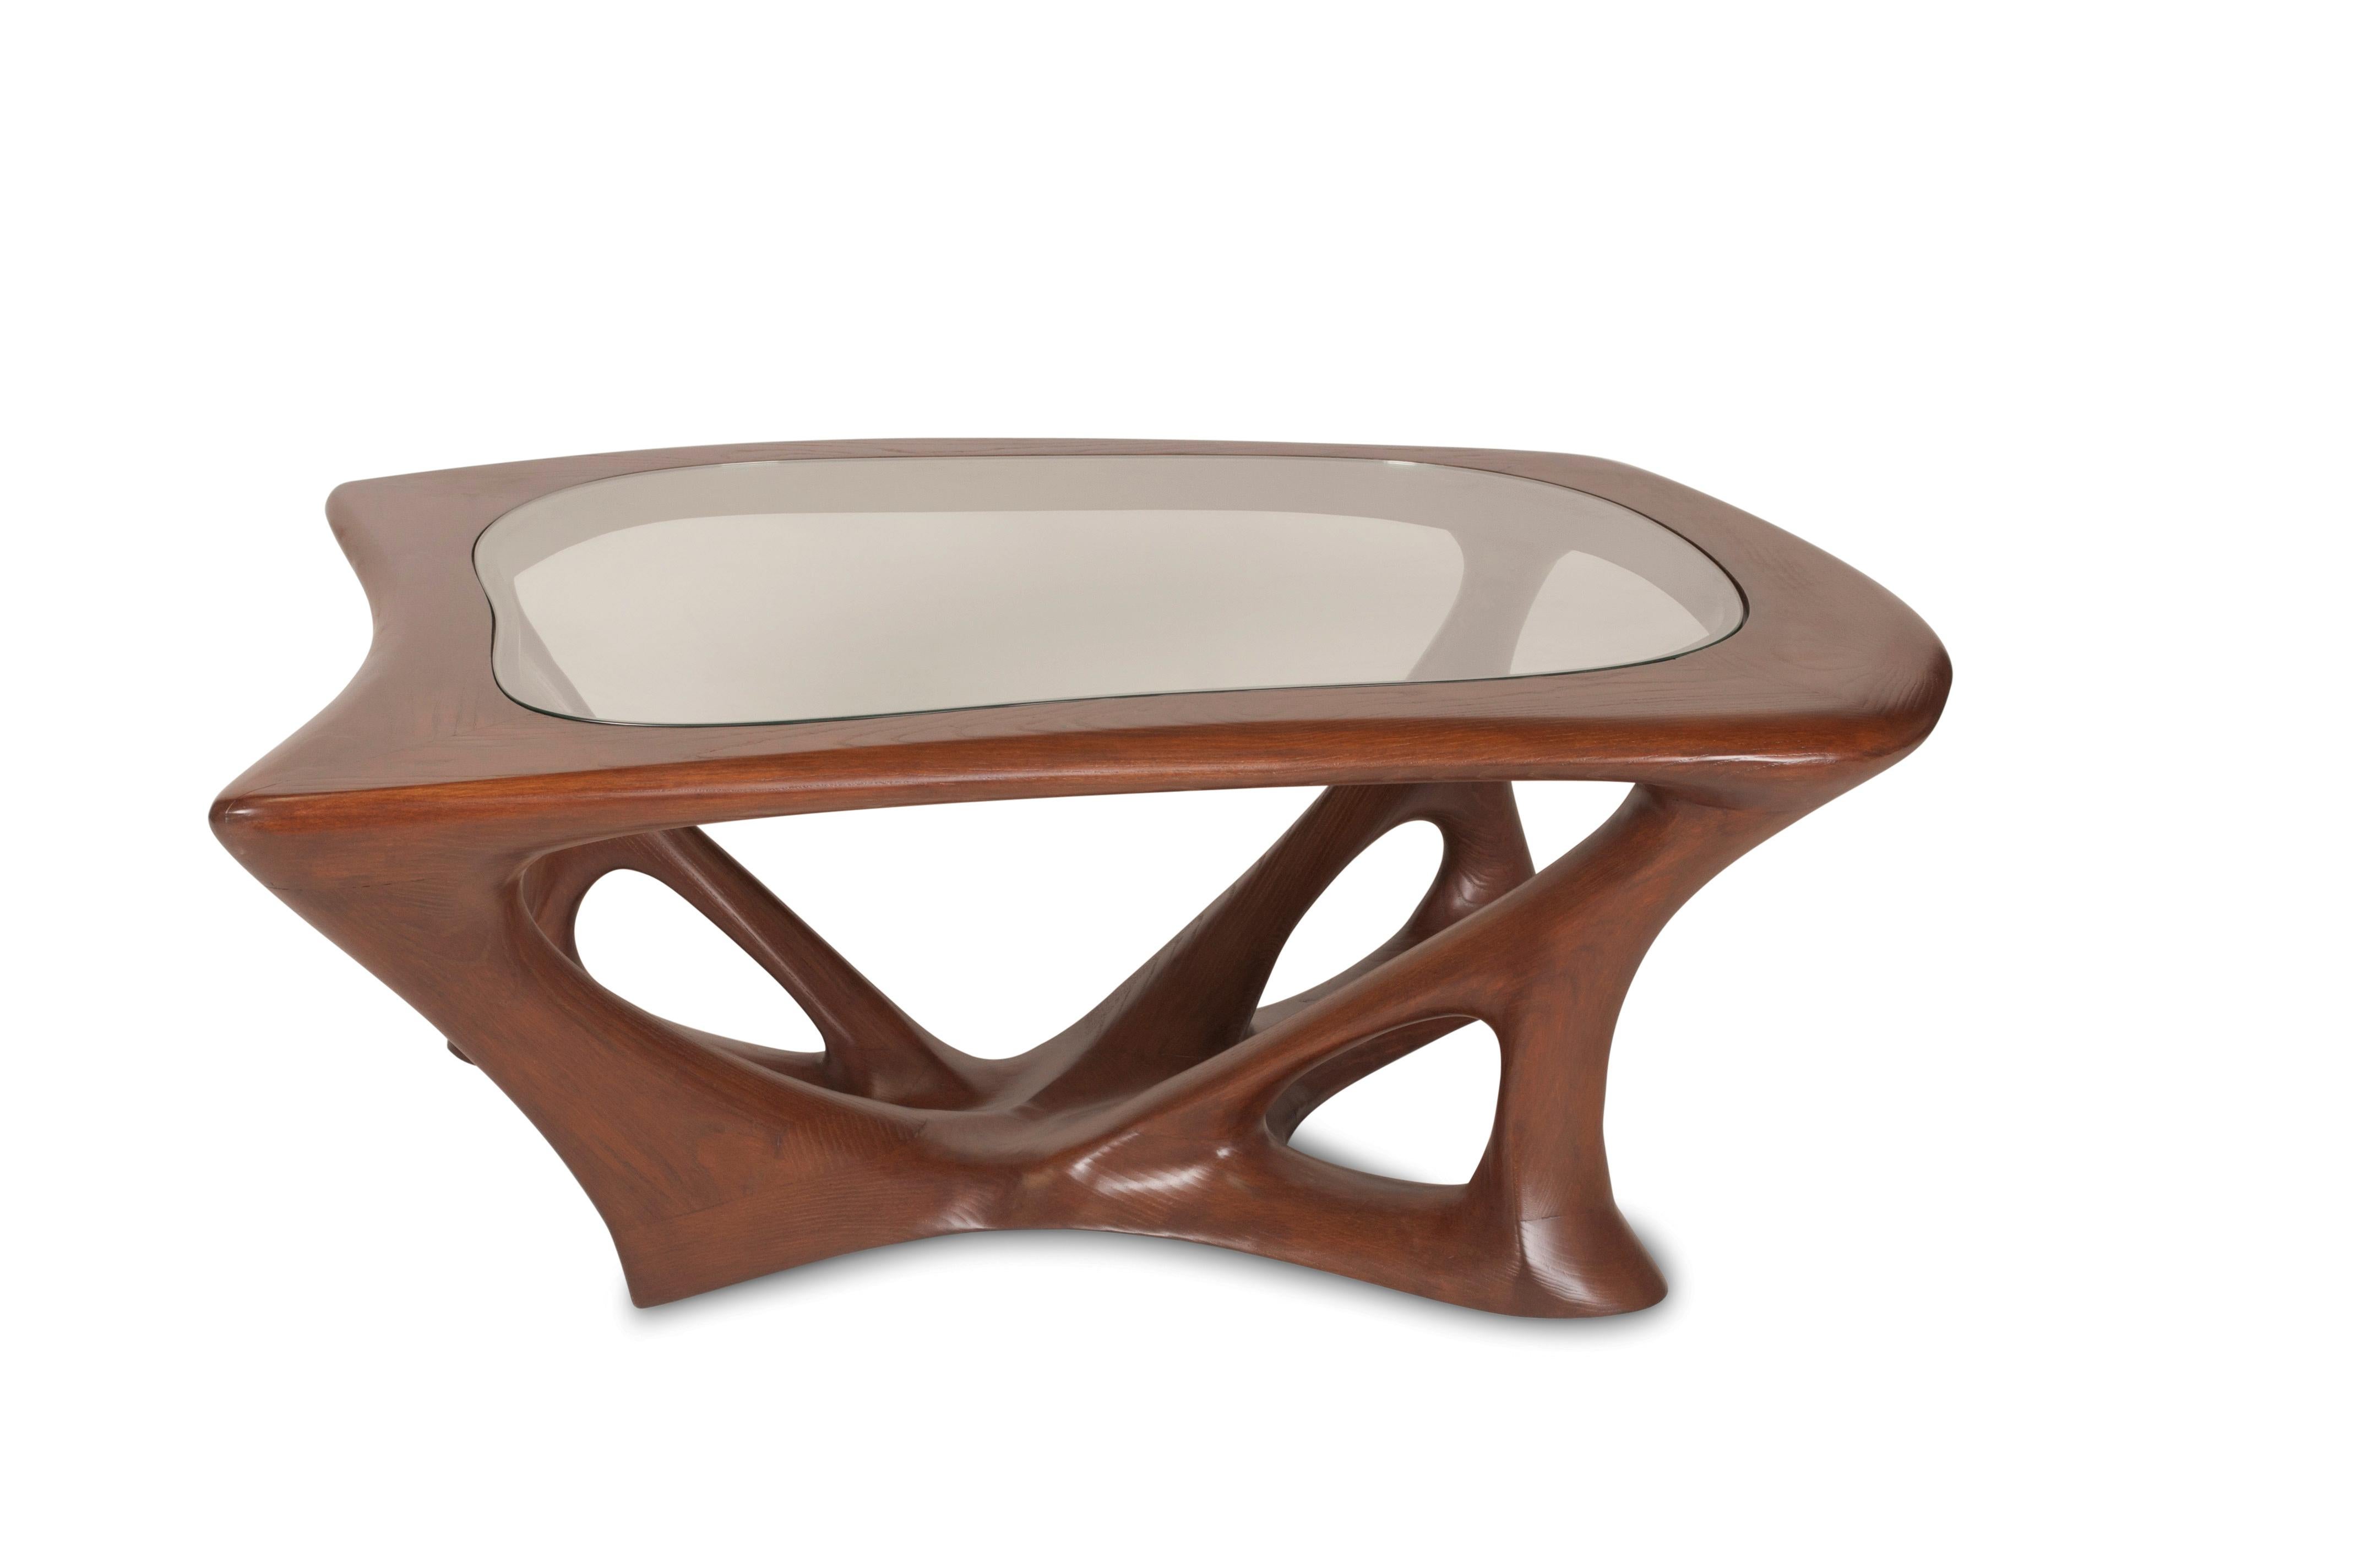 Ariella coffee table is made from solid ashwood. 

About Amorph: 
Amorph is a design and manufacturing company based in Los Angeles, California. We take pride in hand crafted designs connected to technology to create sophisticated, design driven